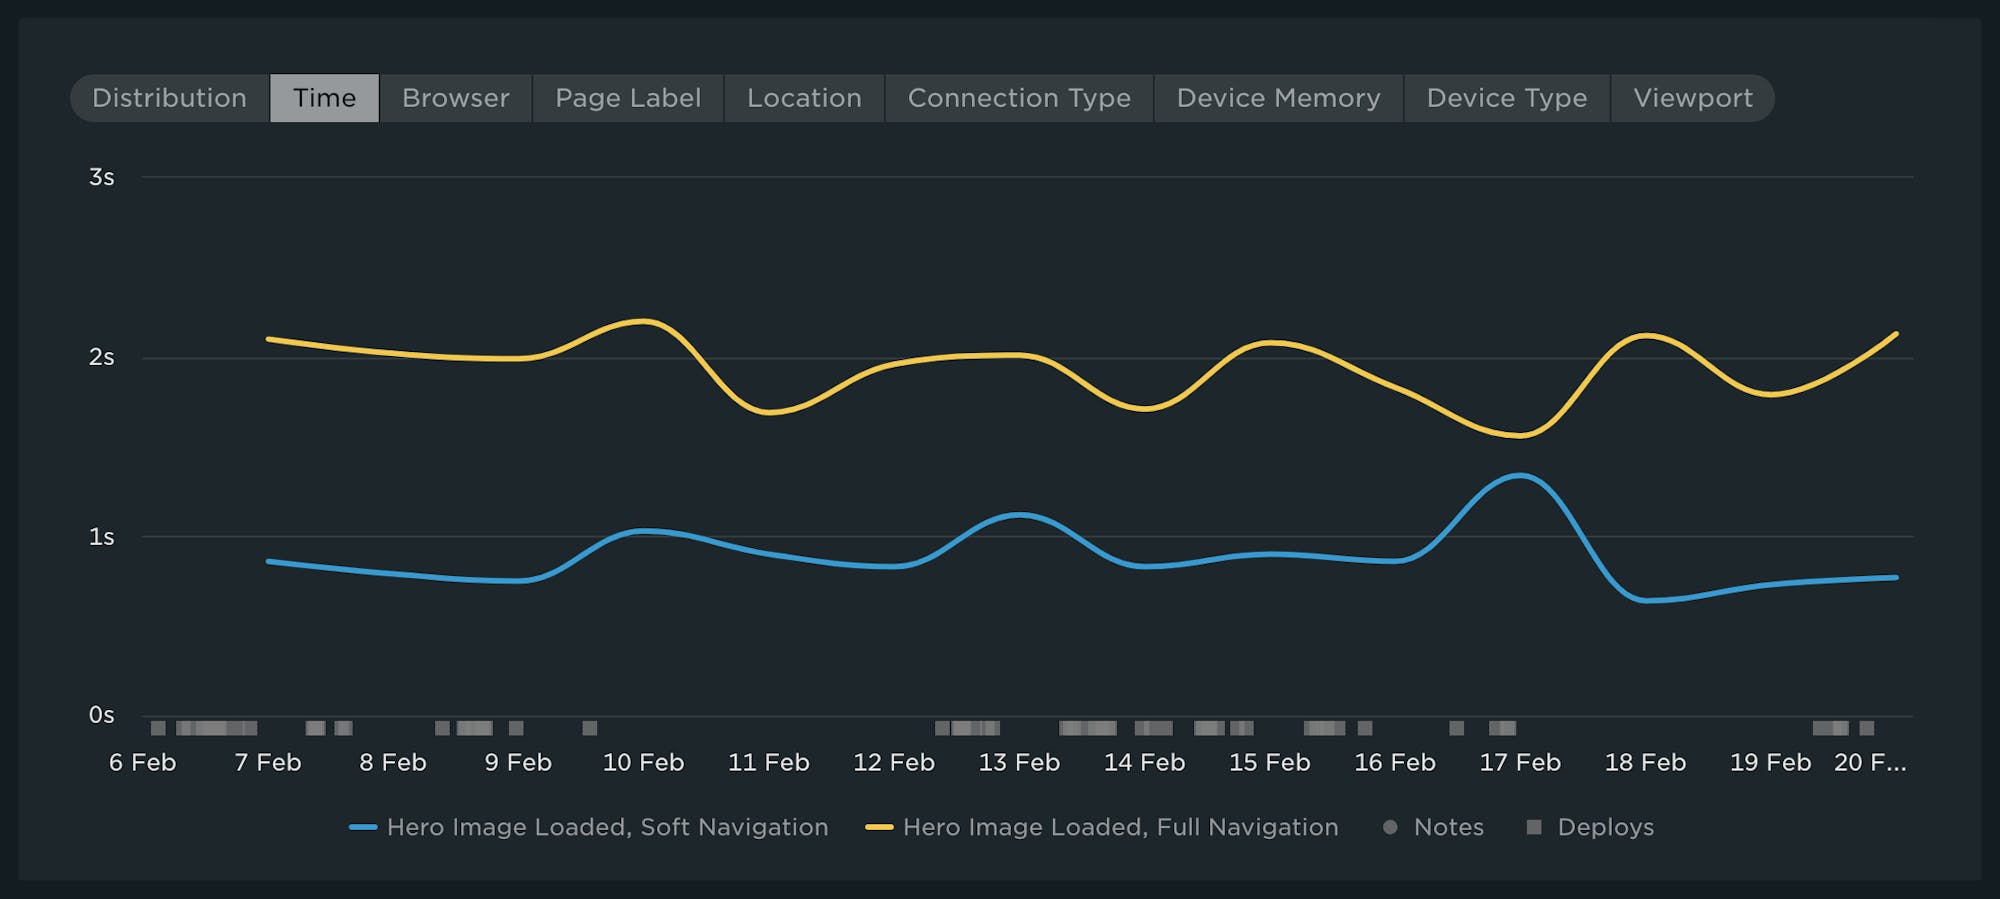 Time series chart showing full vs. soft navigation for a custom metric called Hero Image loaded.